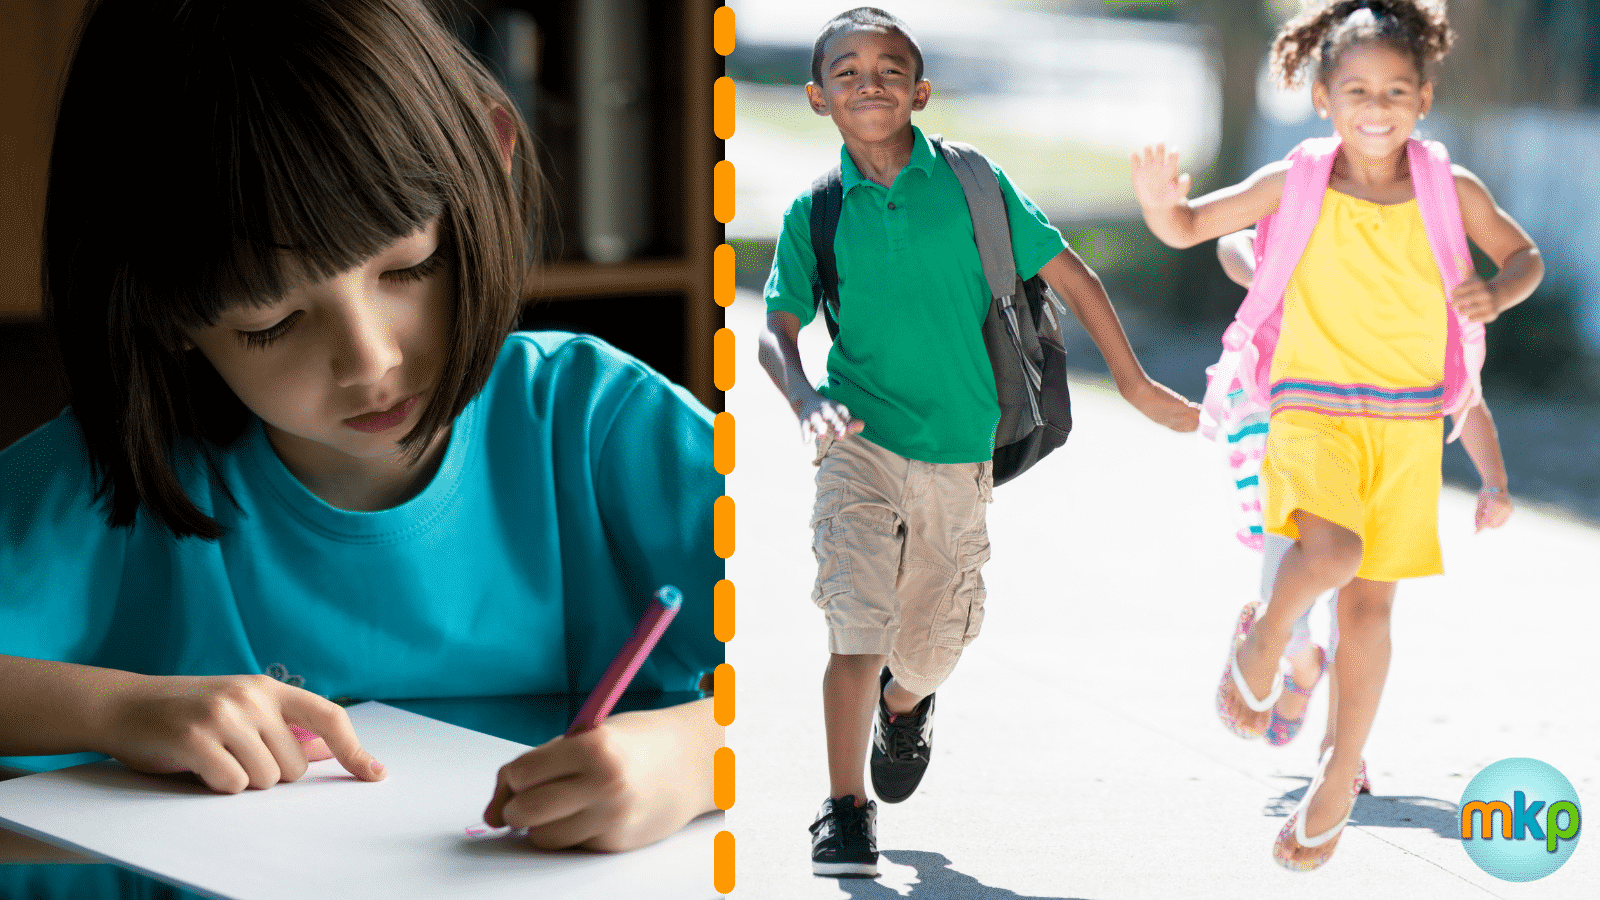 Two photos side by side: A child holds a paper still while writing on it with their left hand (Left), 2 children wearing backpacks skip together (Right).